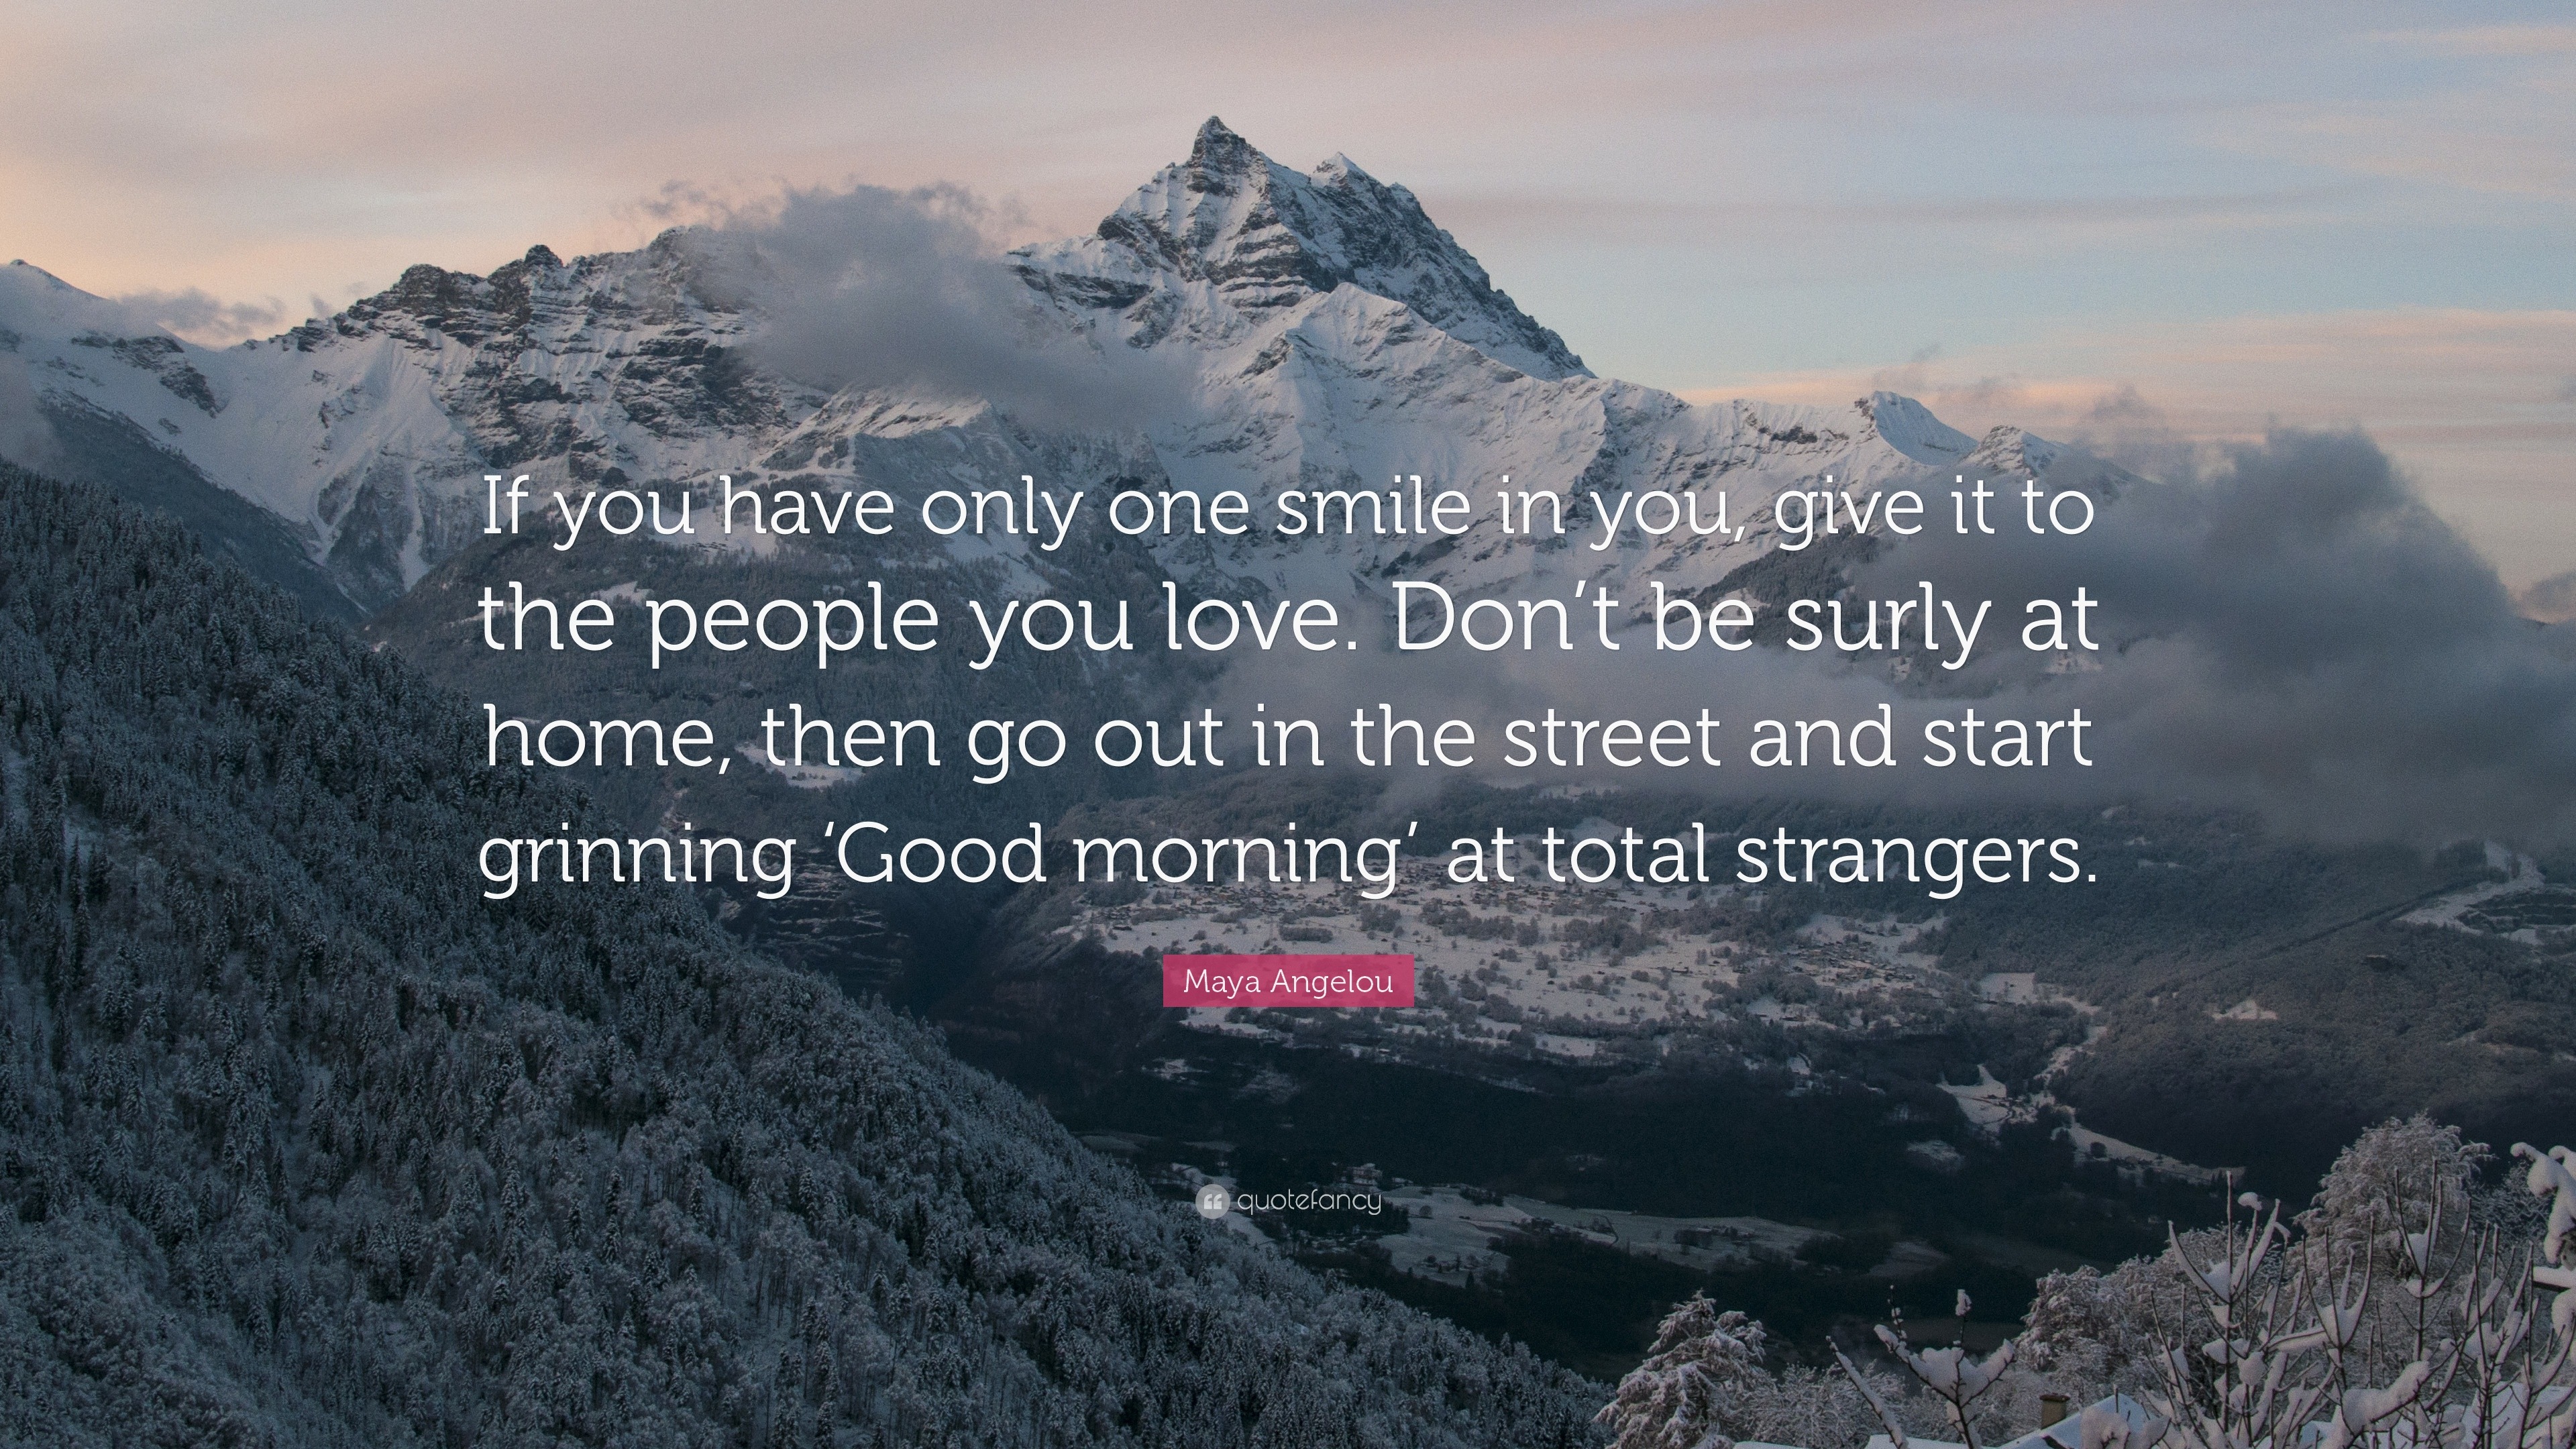 Good Morning Quotes “If you have only one smile in you give it